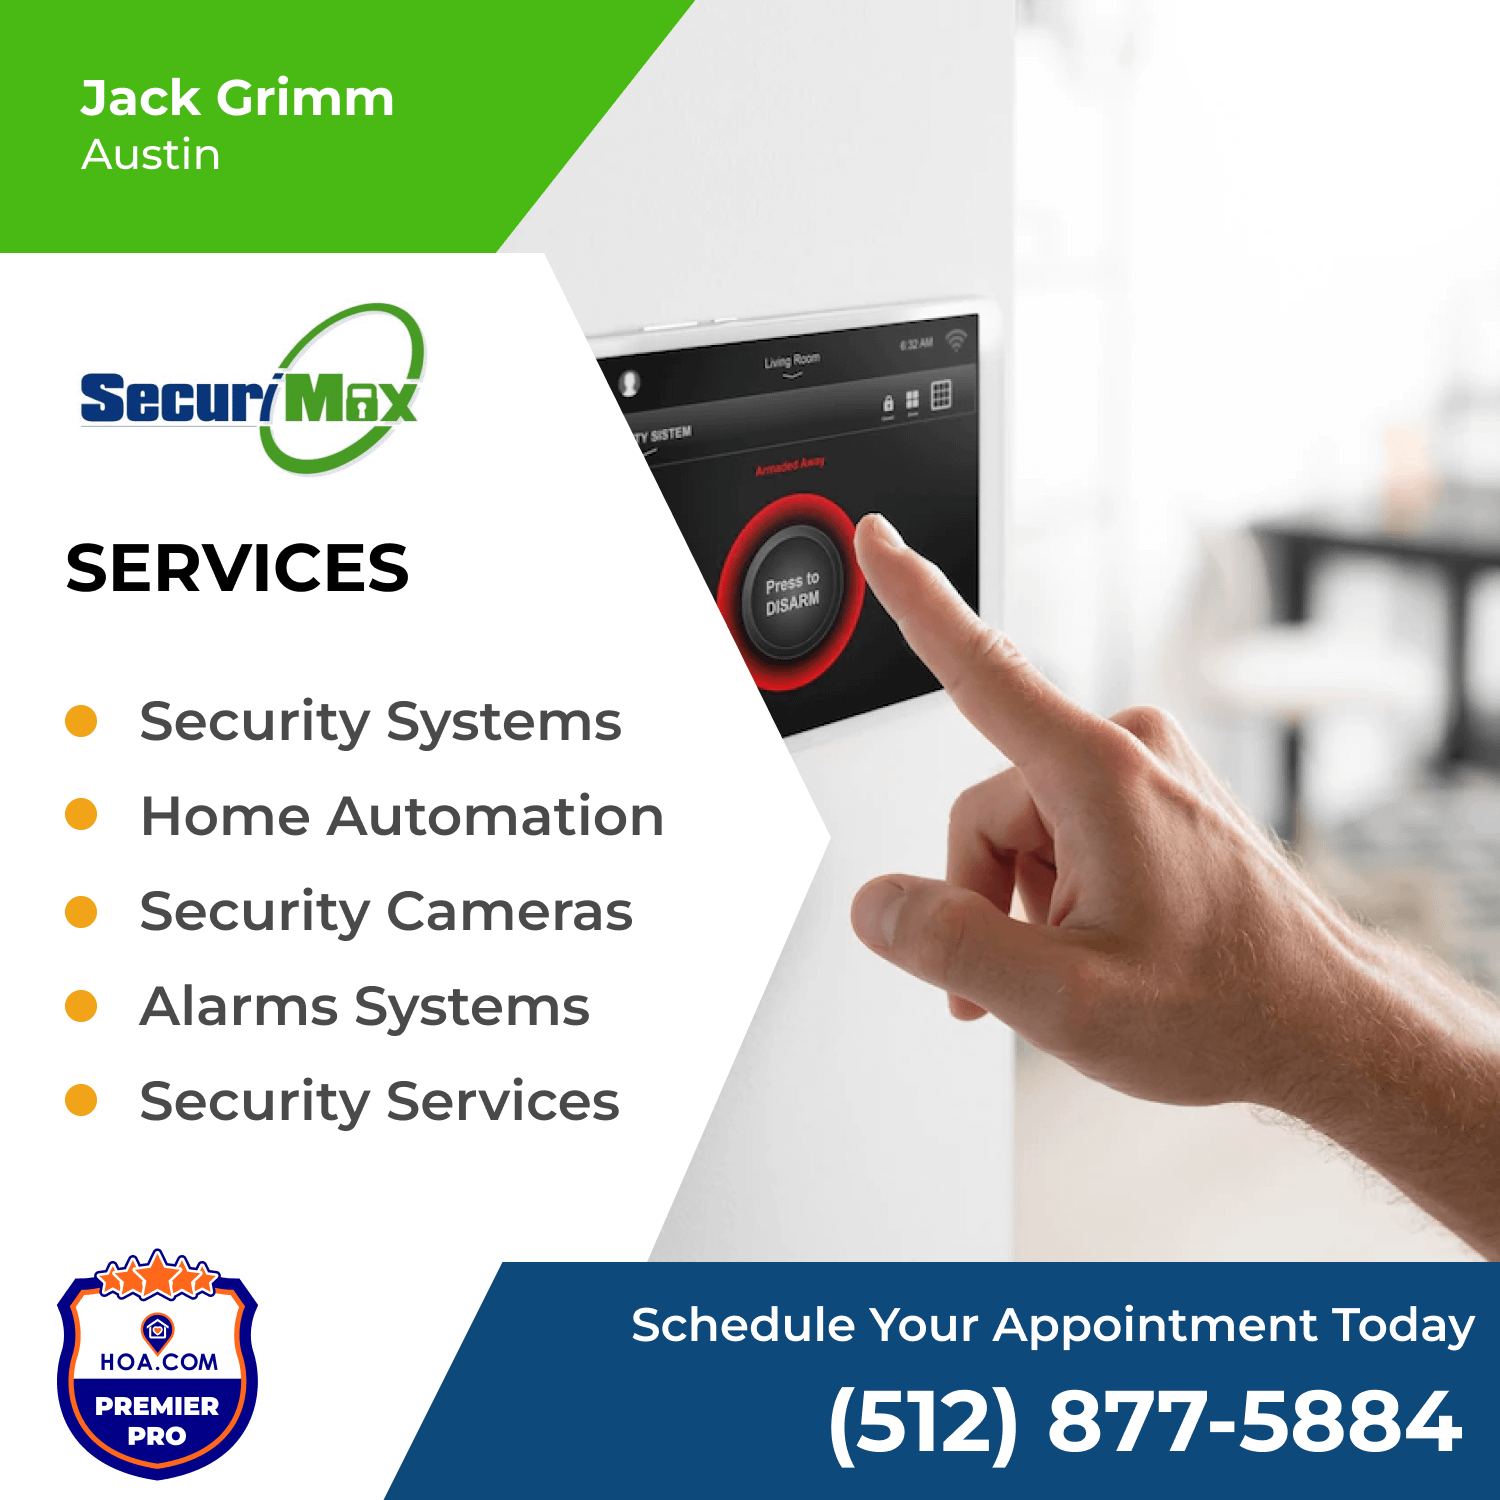 Securimax Services Offered